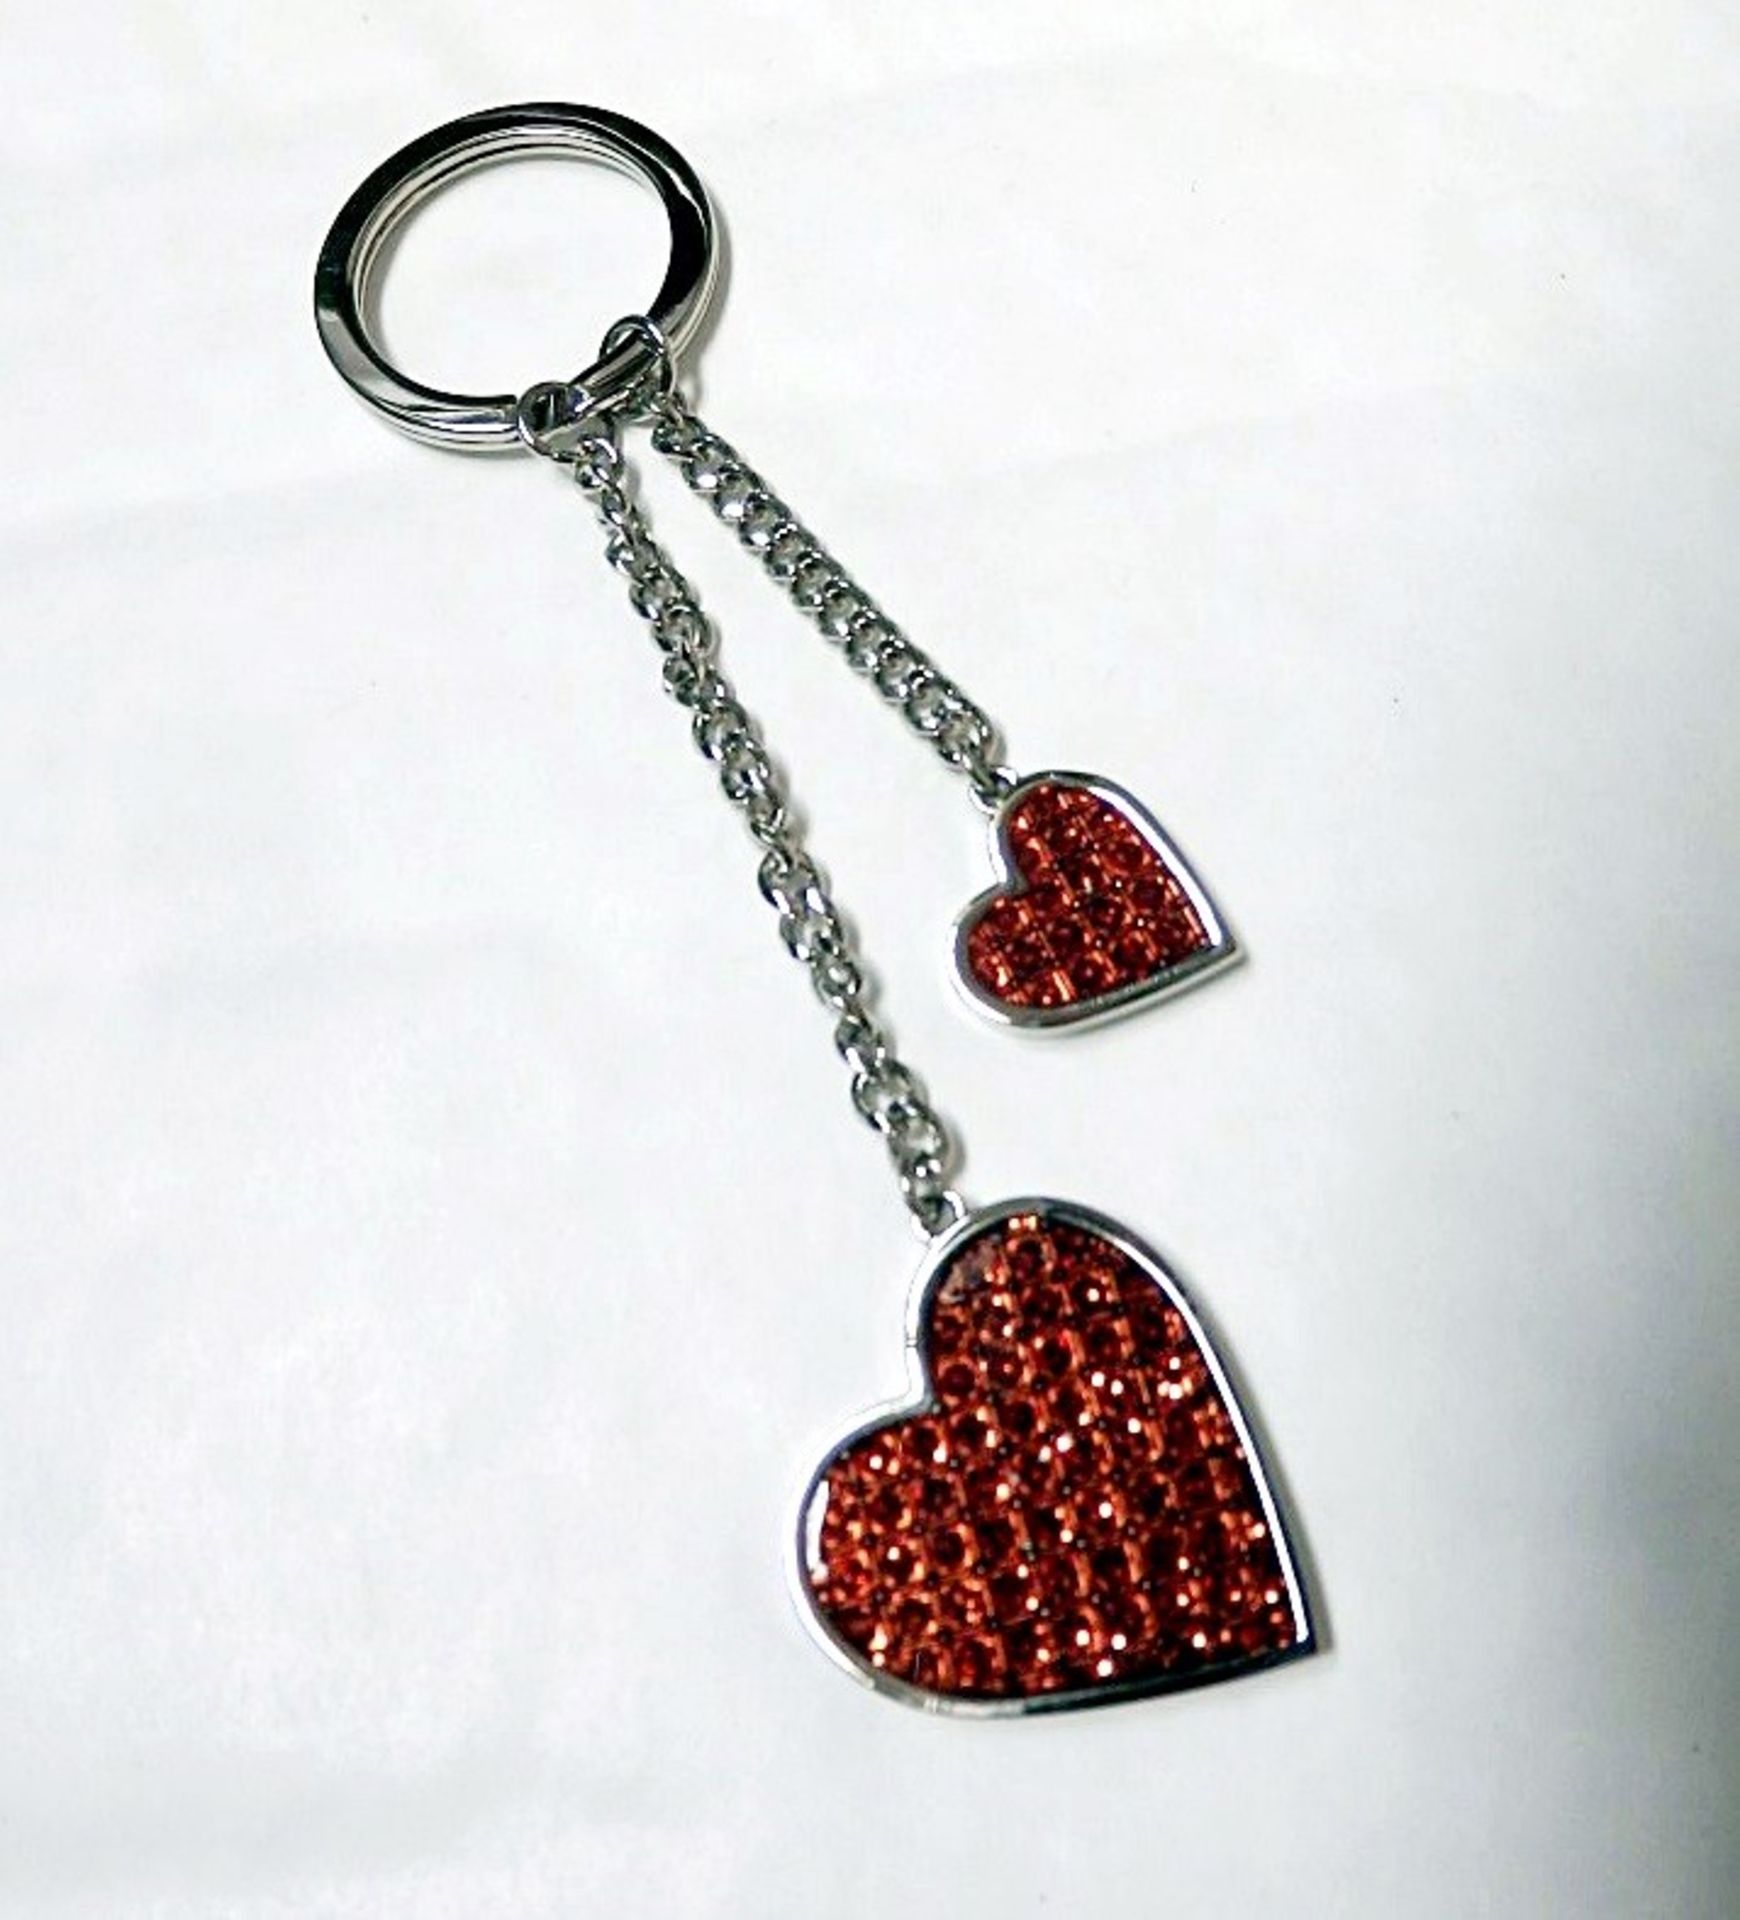 10 x Sterling Silver Plated Red Heart Key Rings with ICE London Crystals - Brand New & Sealed - Image 4 of 4